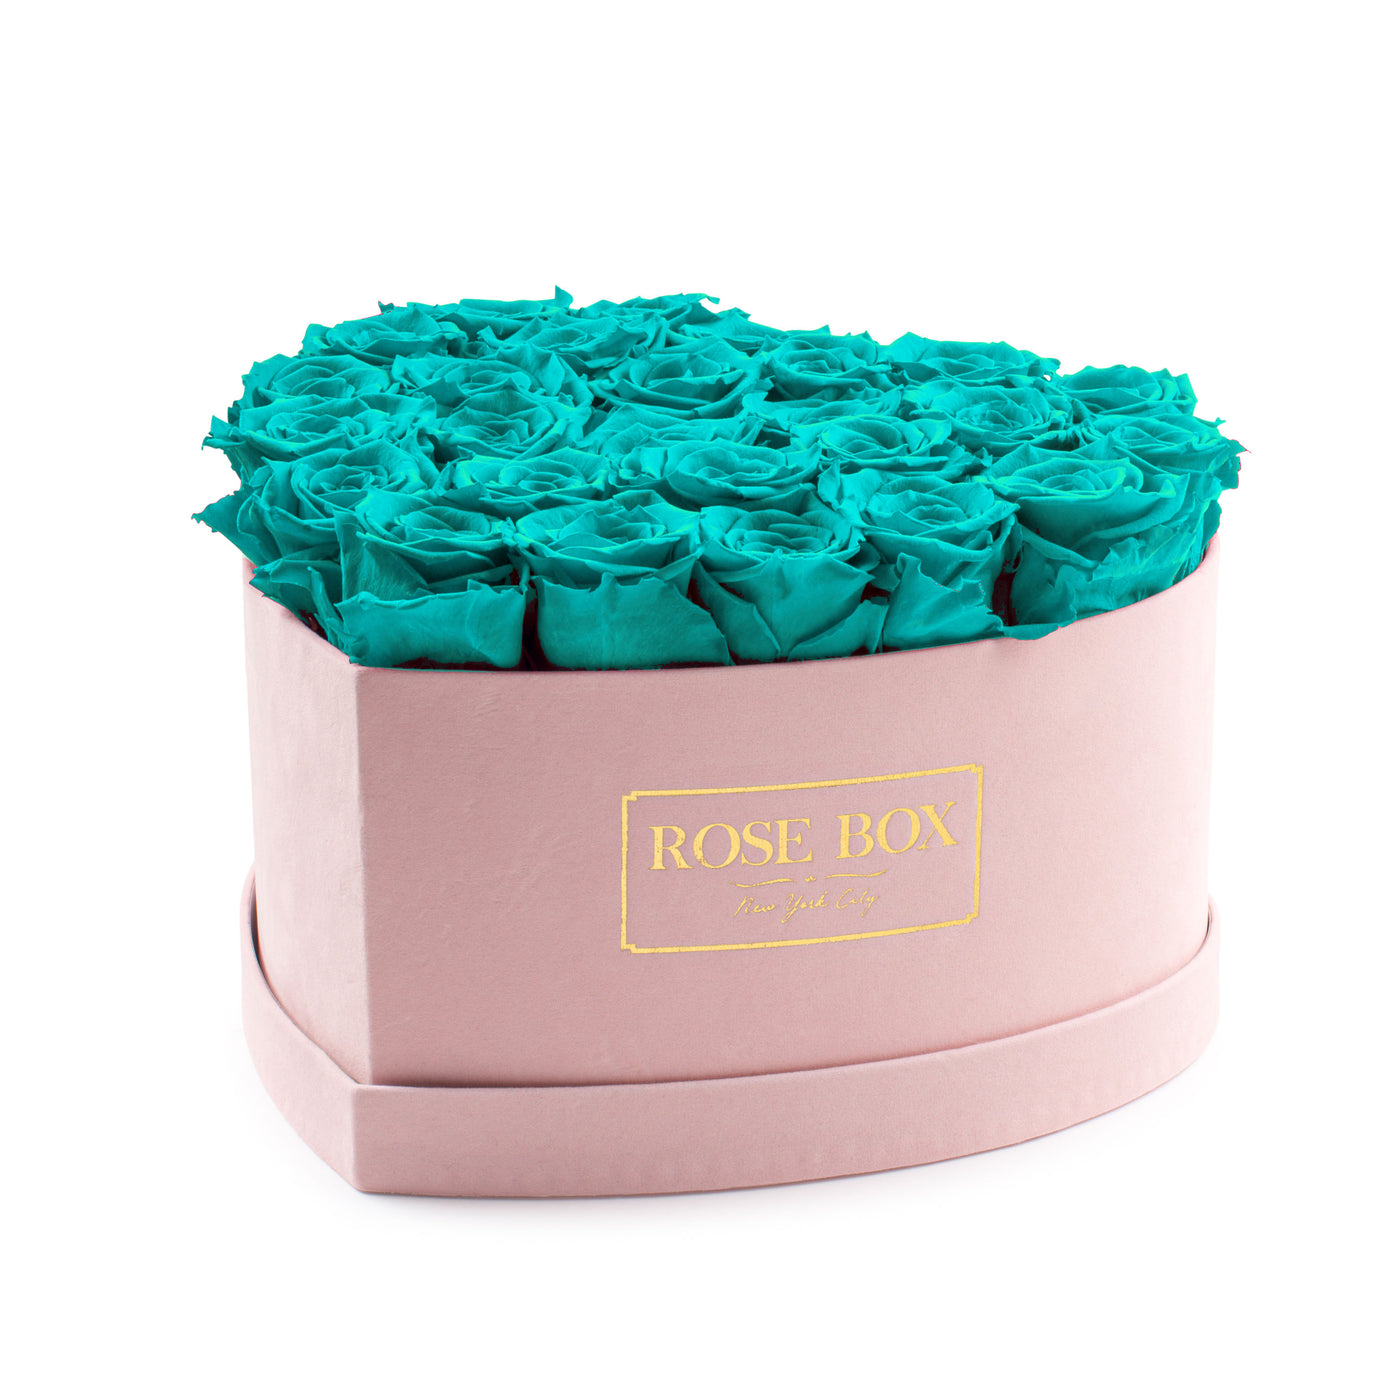 Large Pink Heart Box with Turquoise Roses